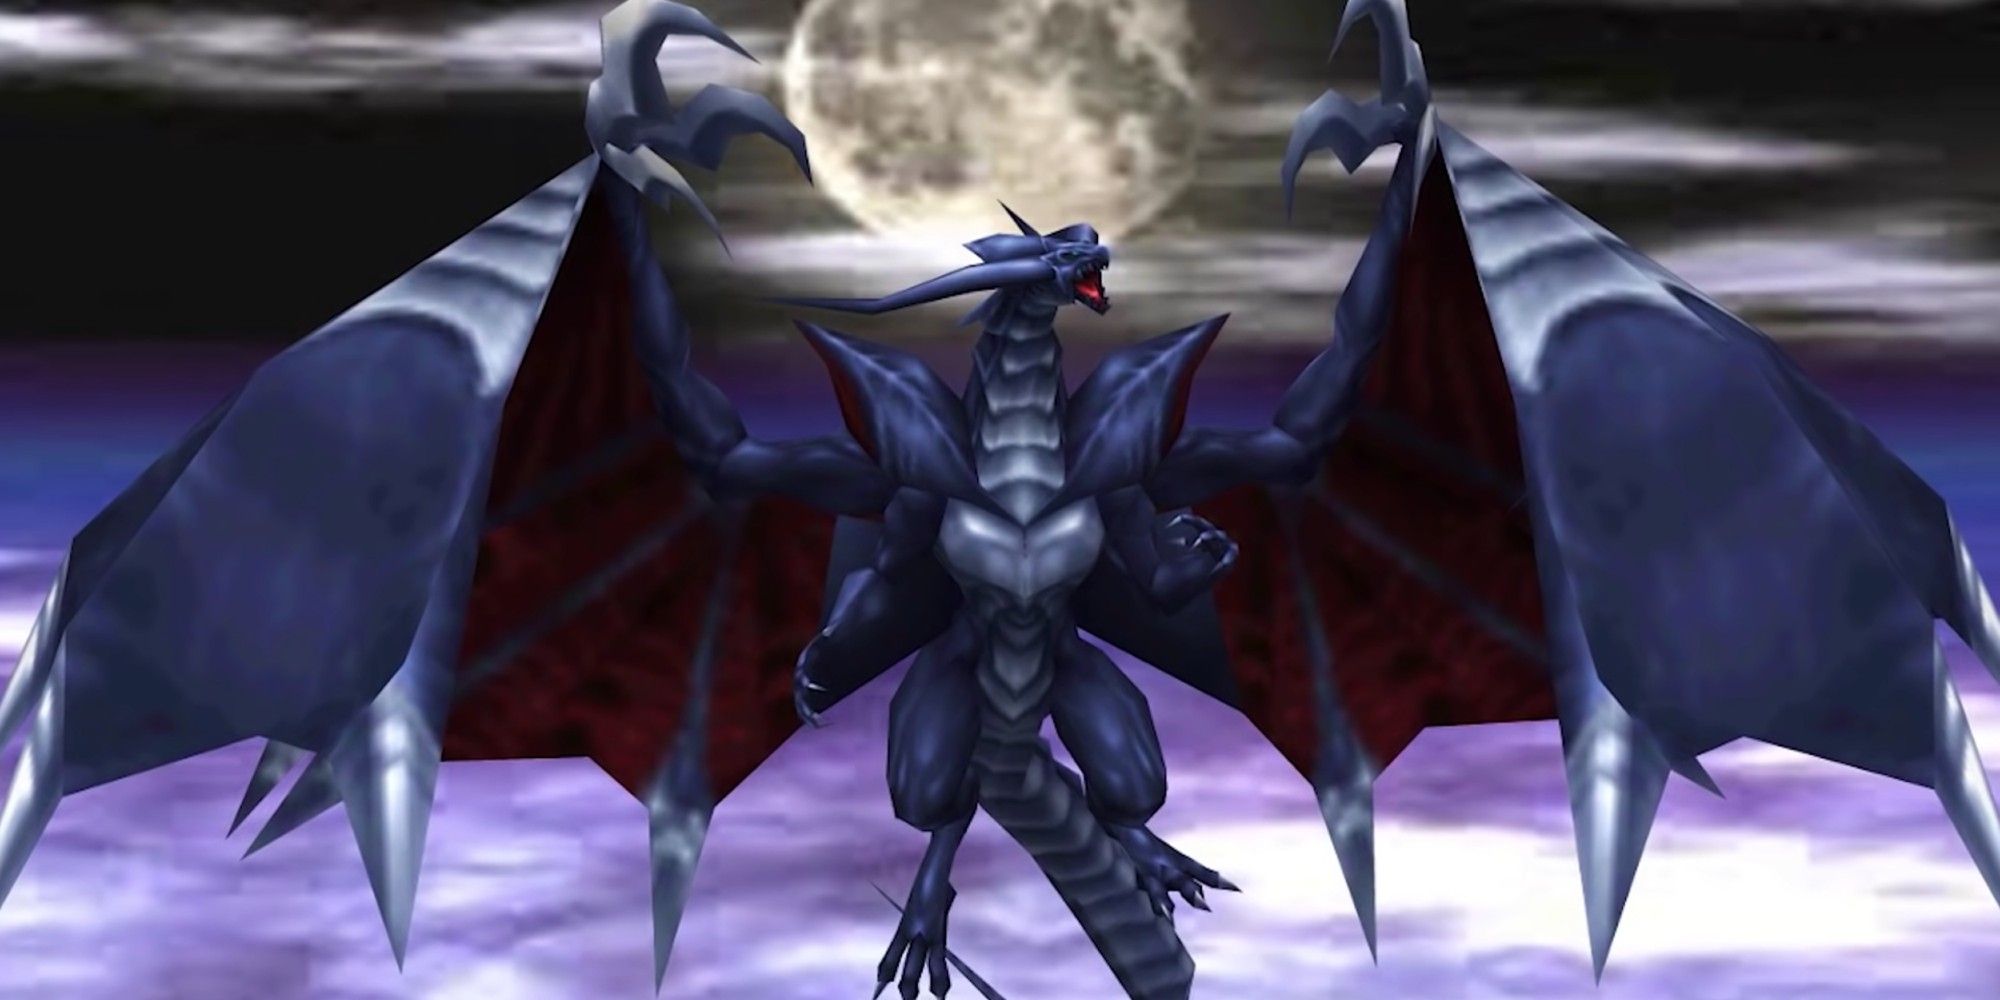 Bahamut FF8 howling at the moon for some reason